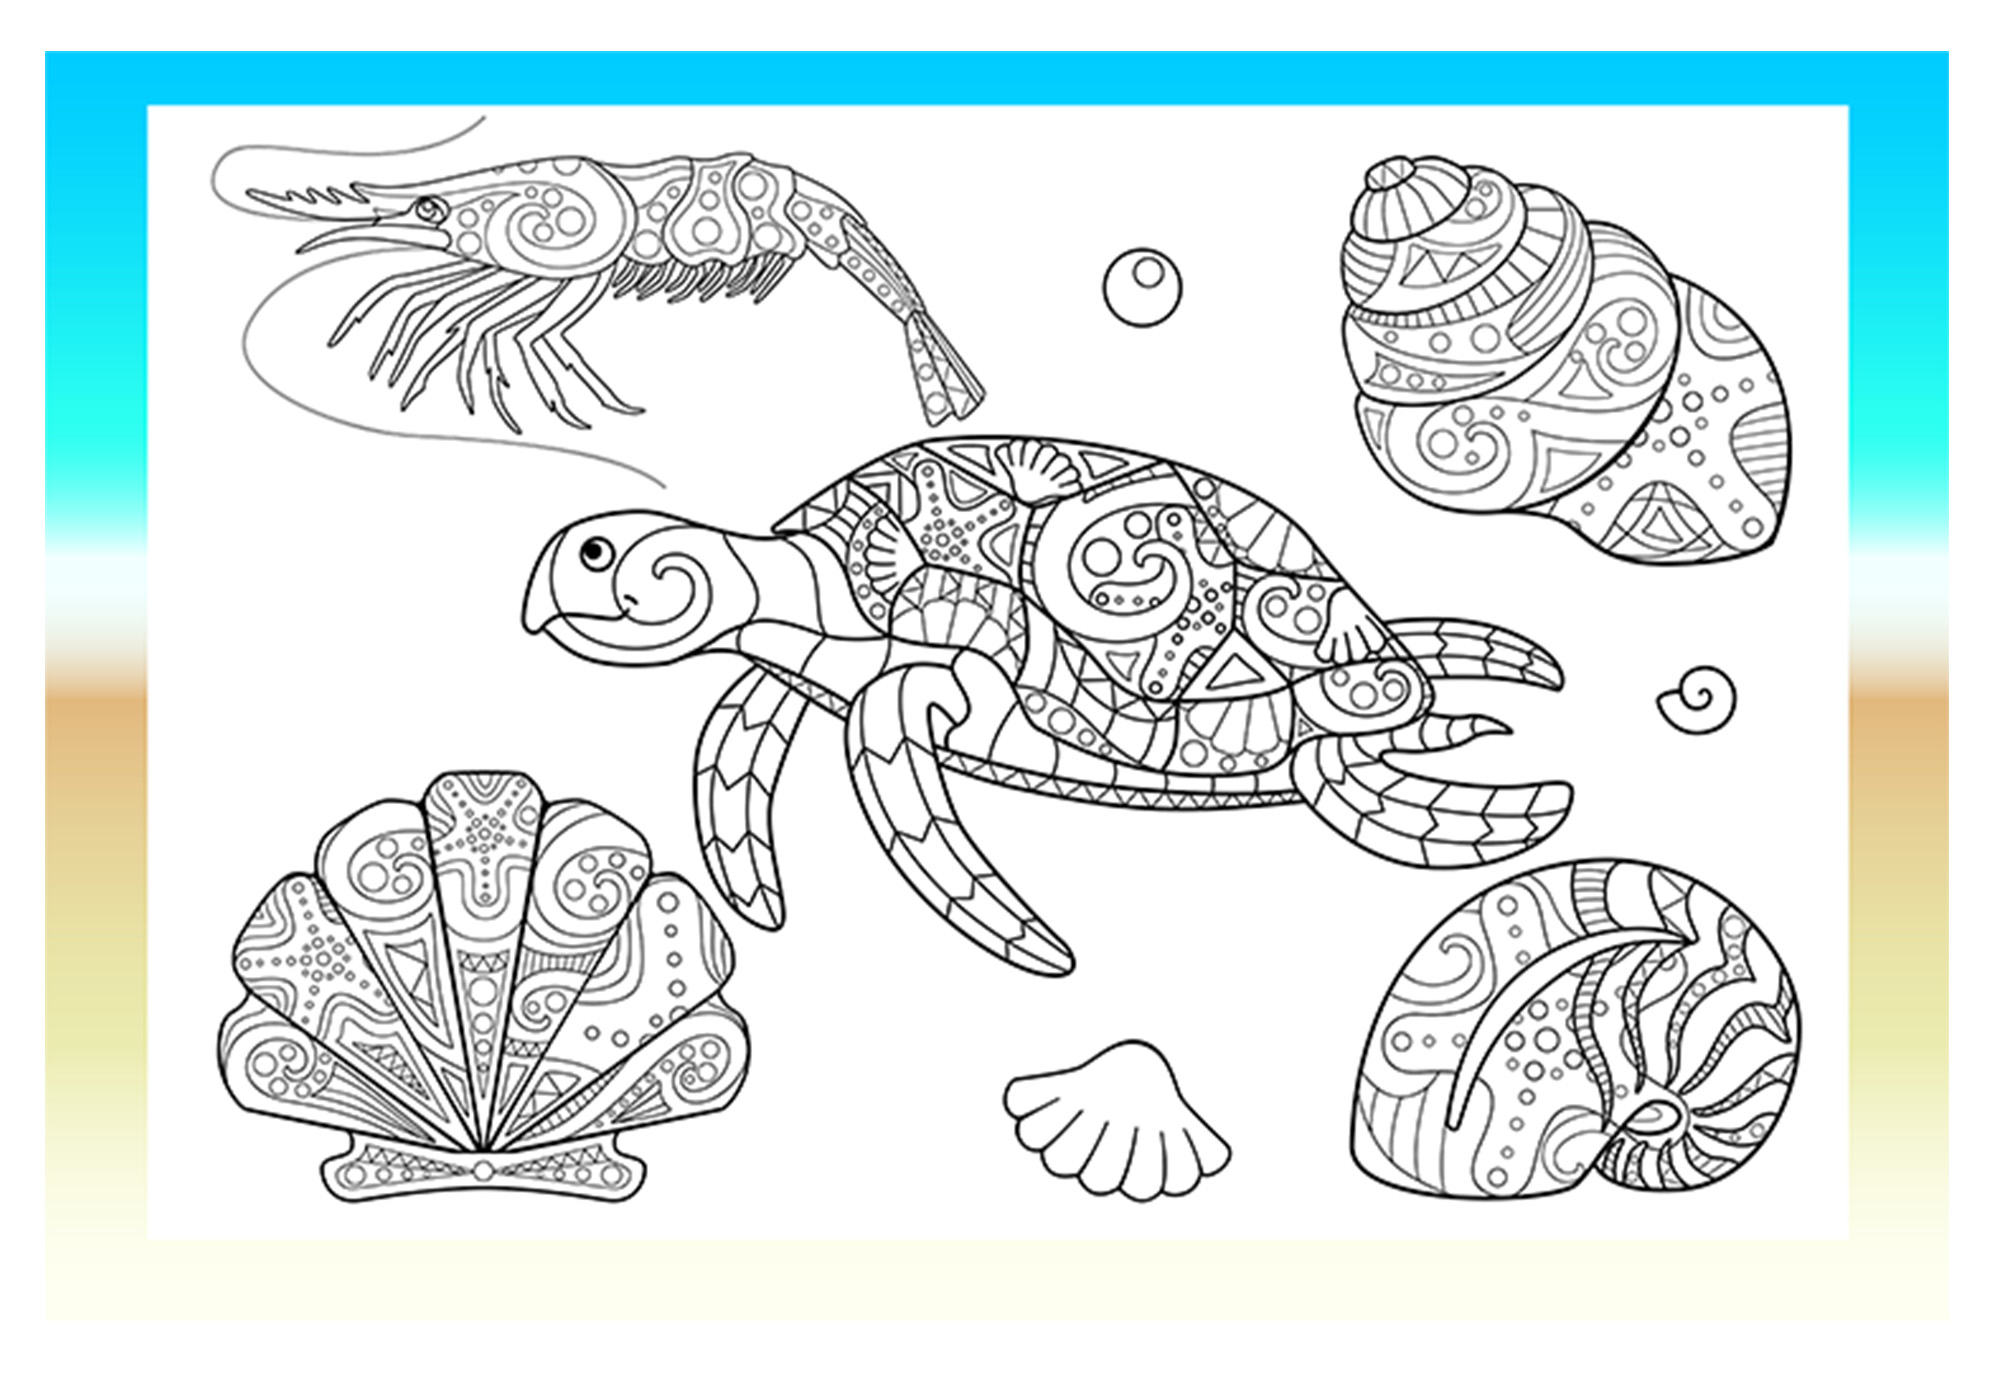 Coloring page with a turtle and shells.